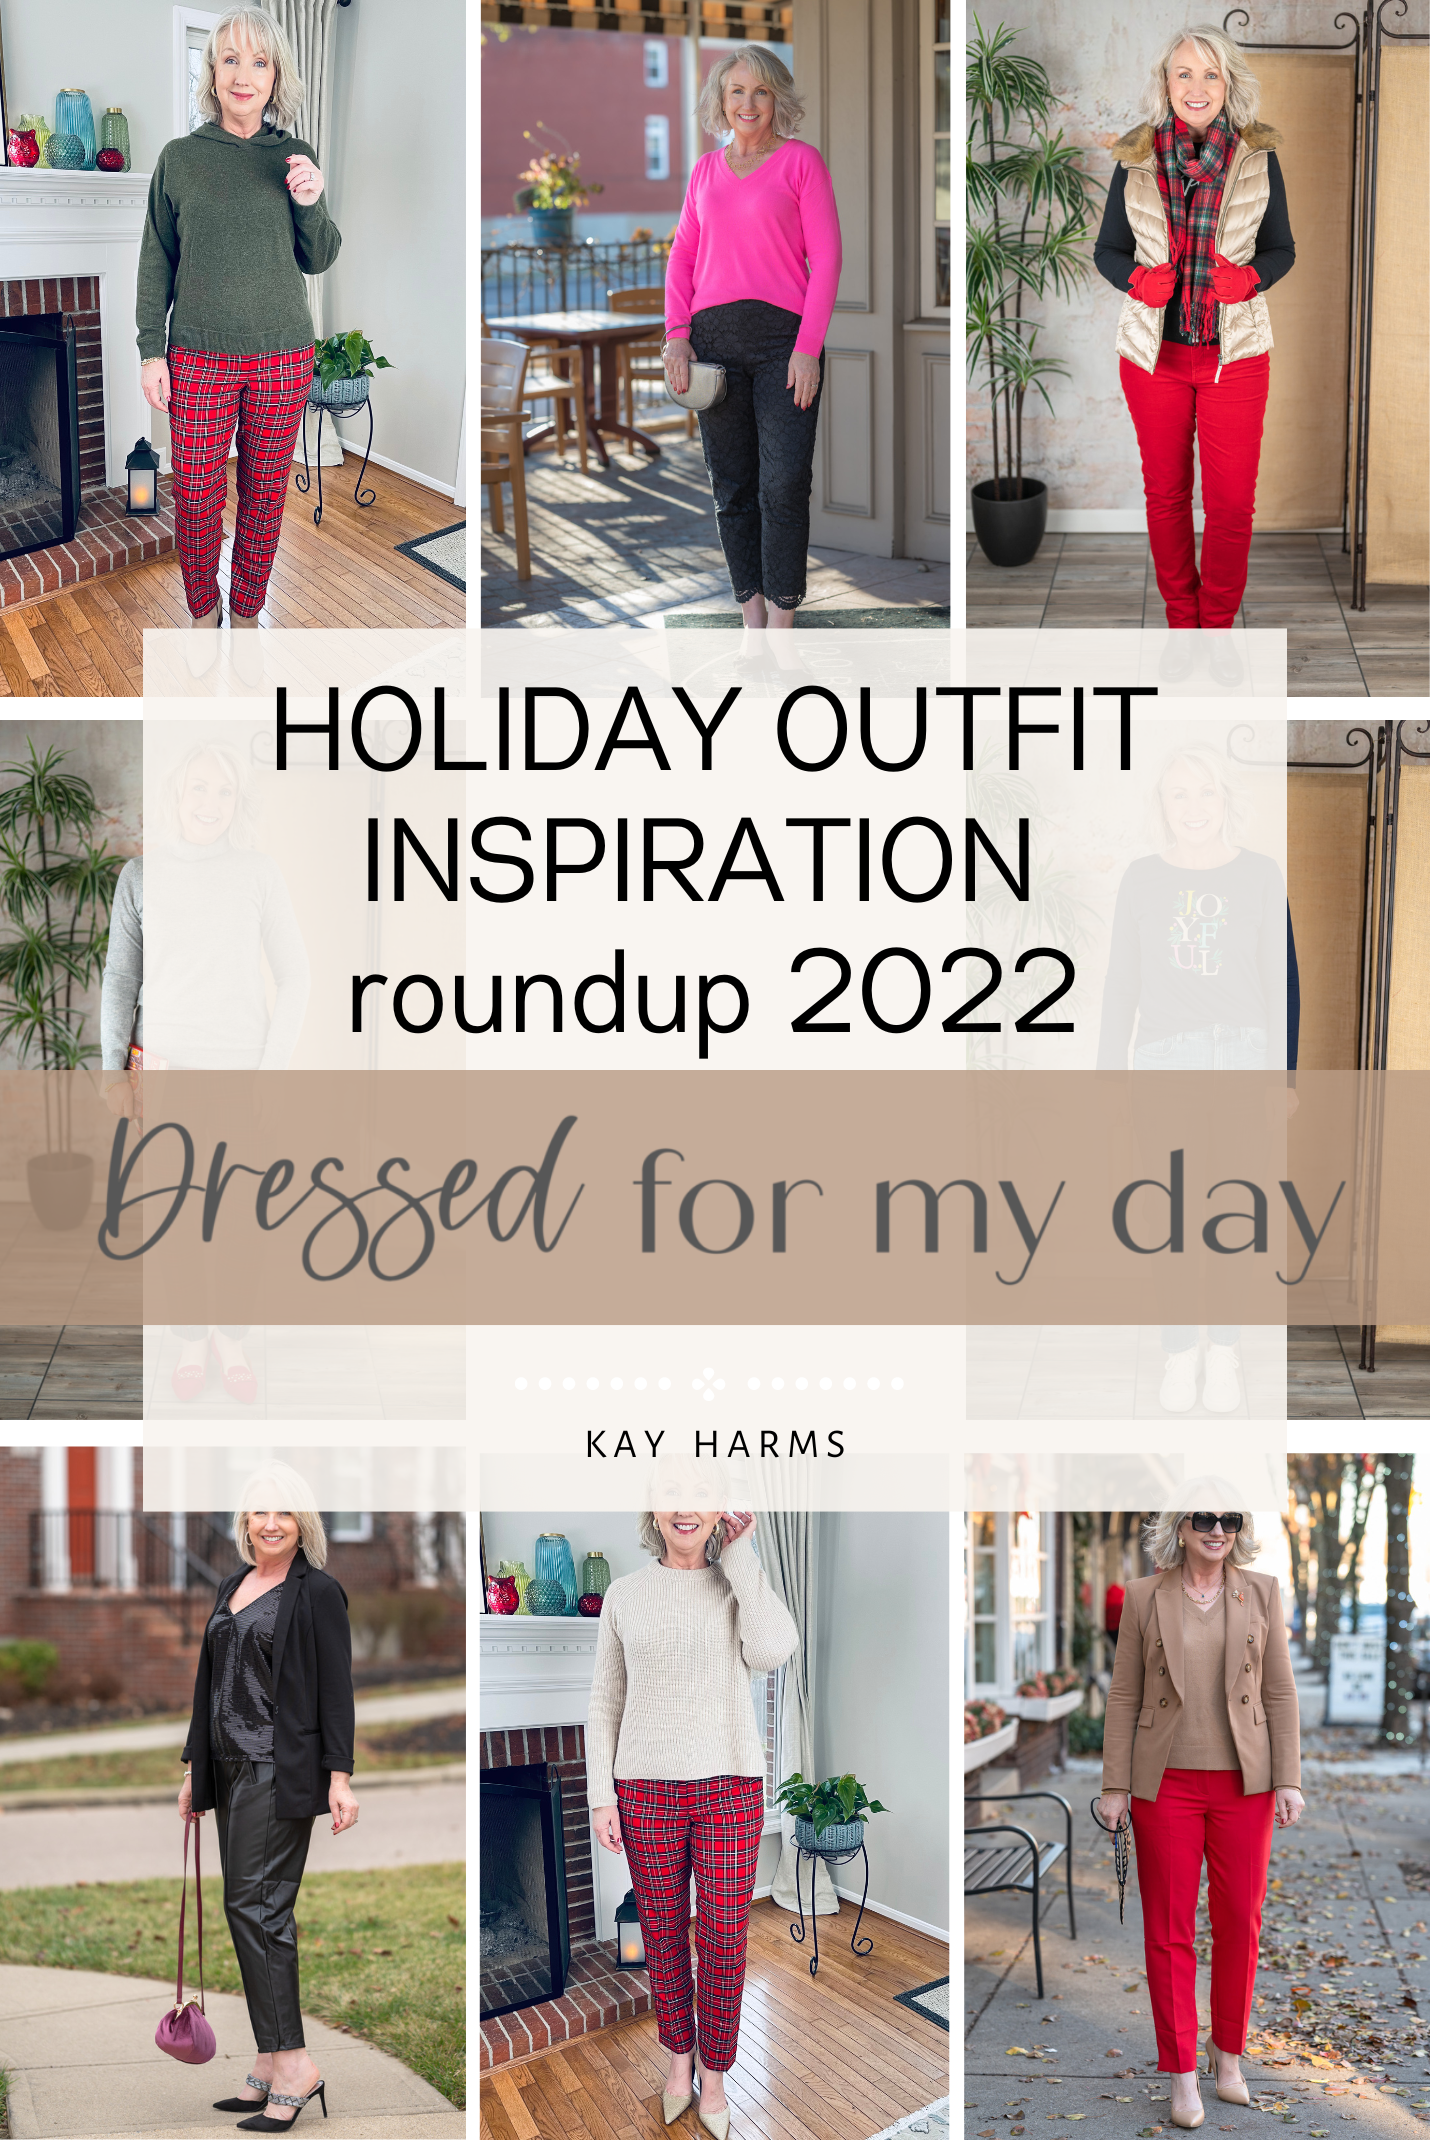 https://dressedformyday.com/wp-content/uploads/2022/12/Holiday-Outfit-Inspiration-Roundup-2022.png